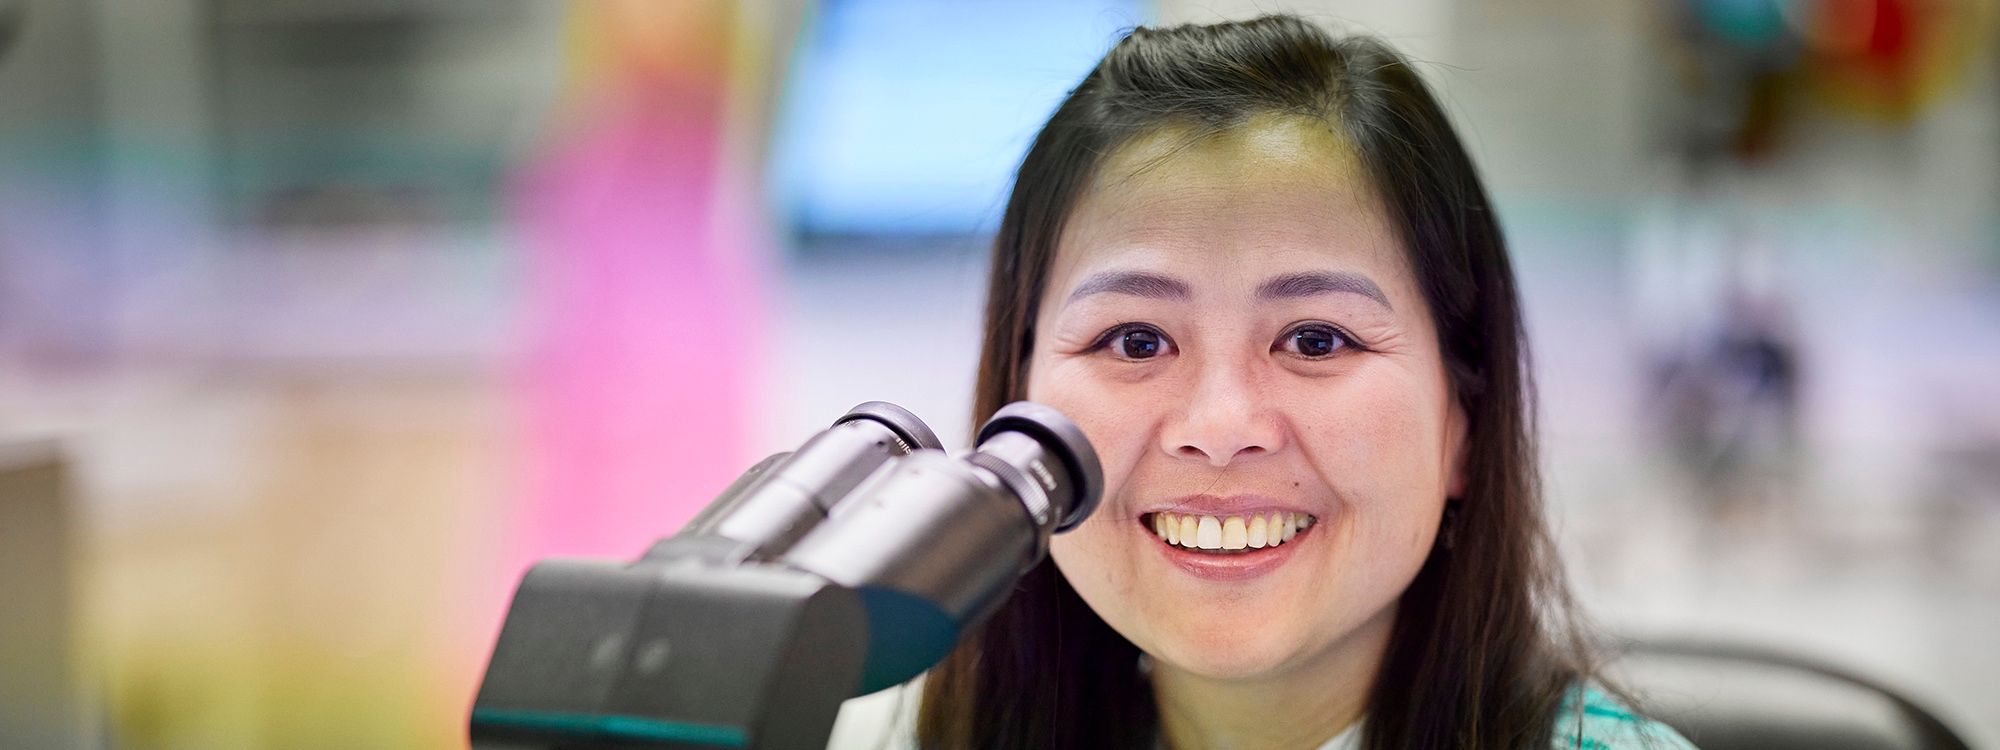 Lab technician smiling while looking up from microscope